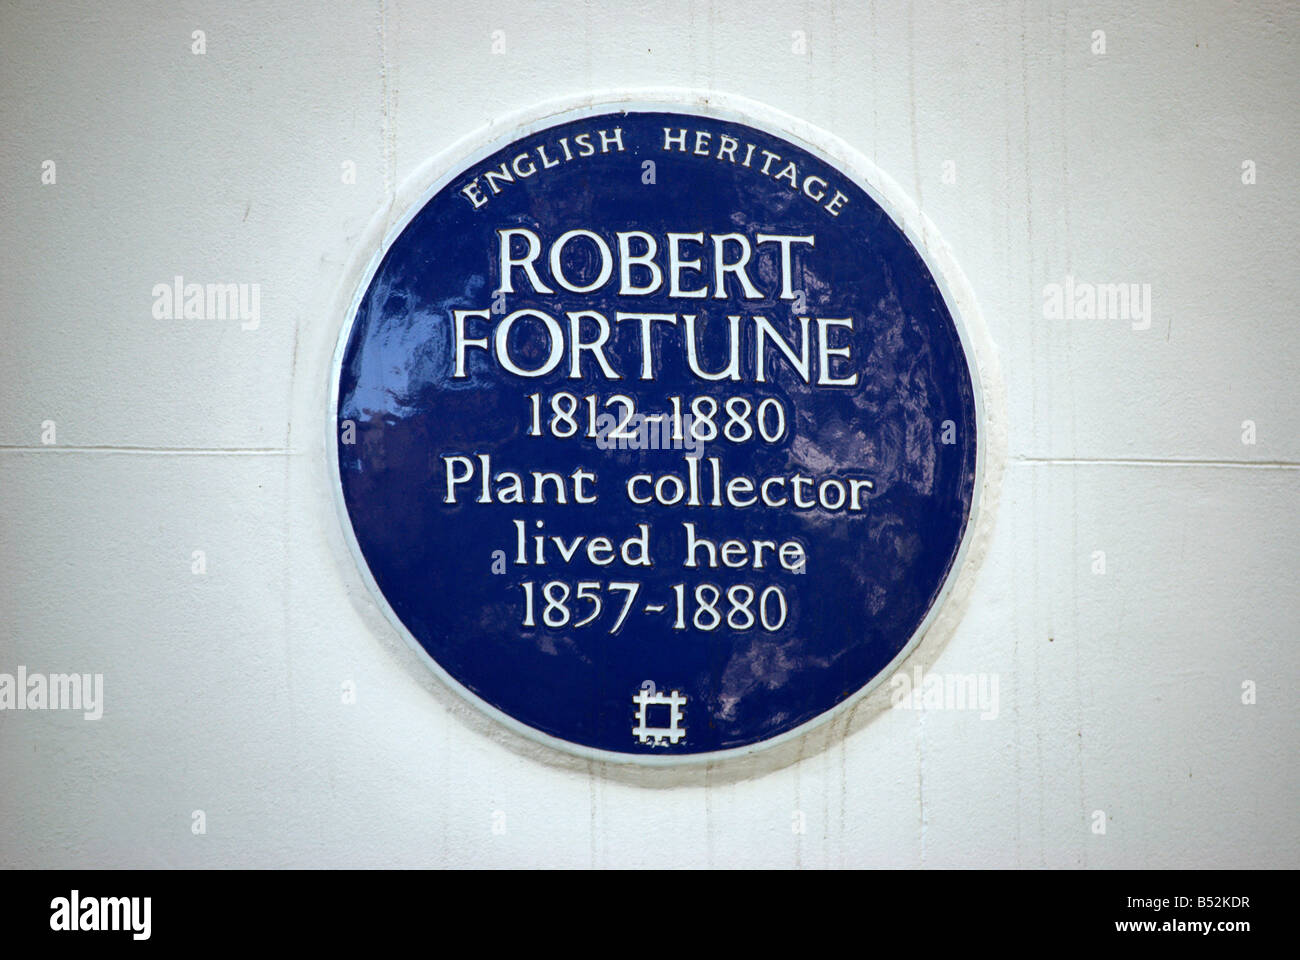 english heritage blue plaque marking a former home of botanist robert fortune, in chelsea, london, england Stock Photo